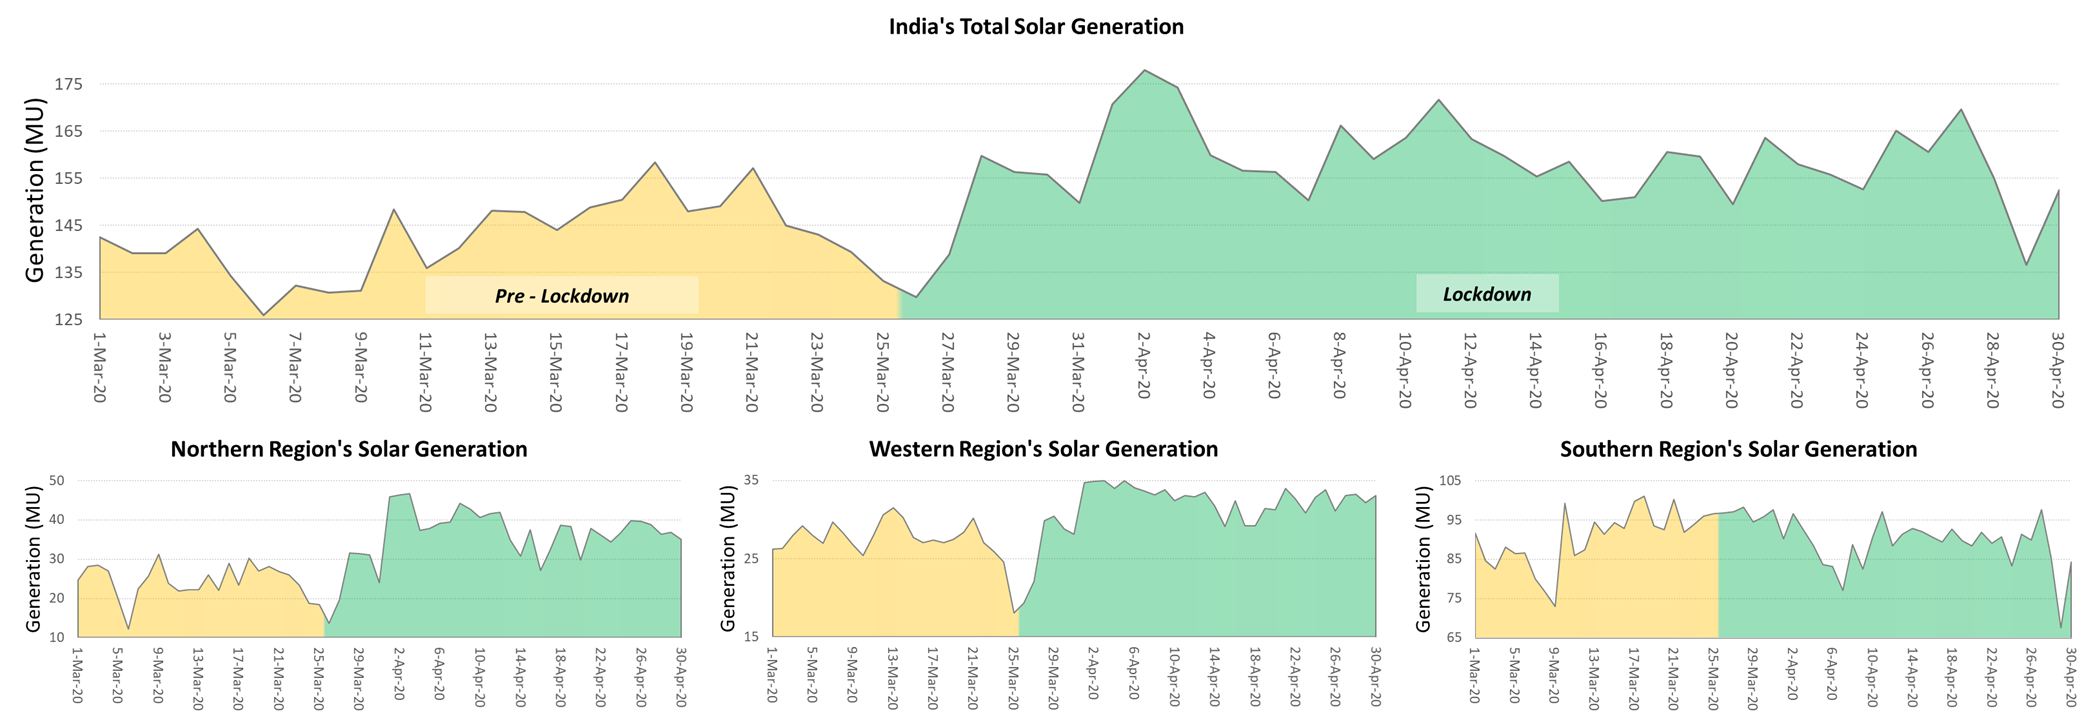 Improved solar power yield: A silver lining in times of COVID-19